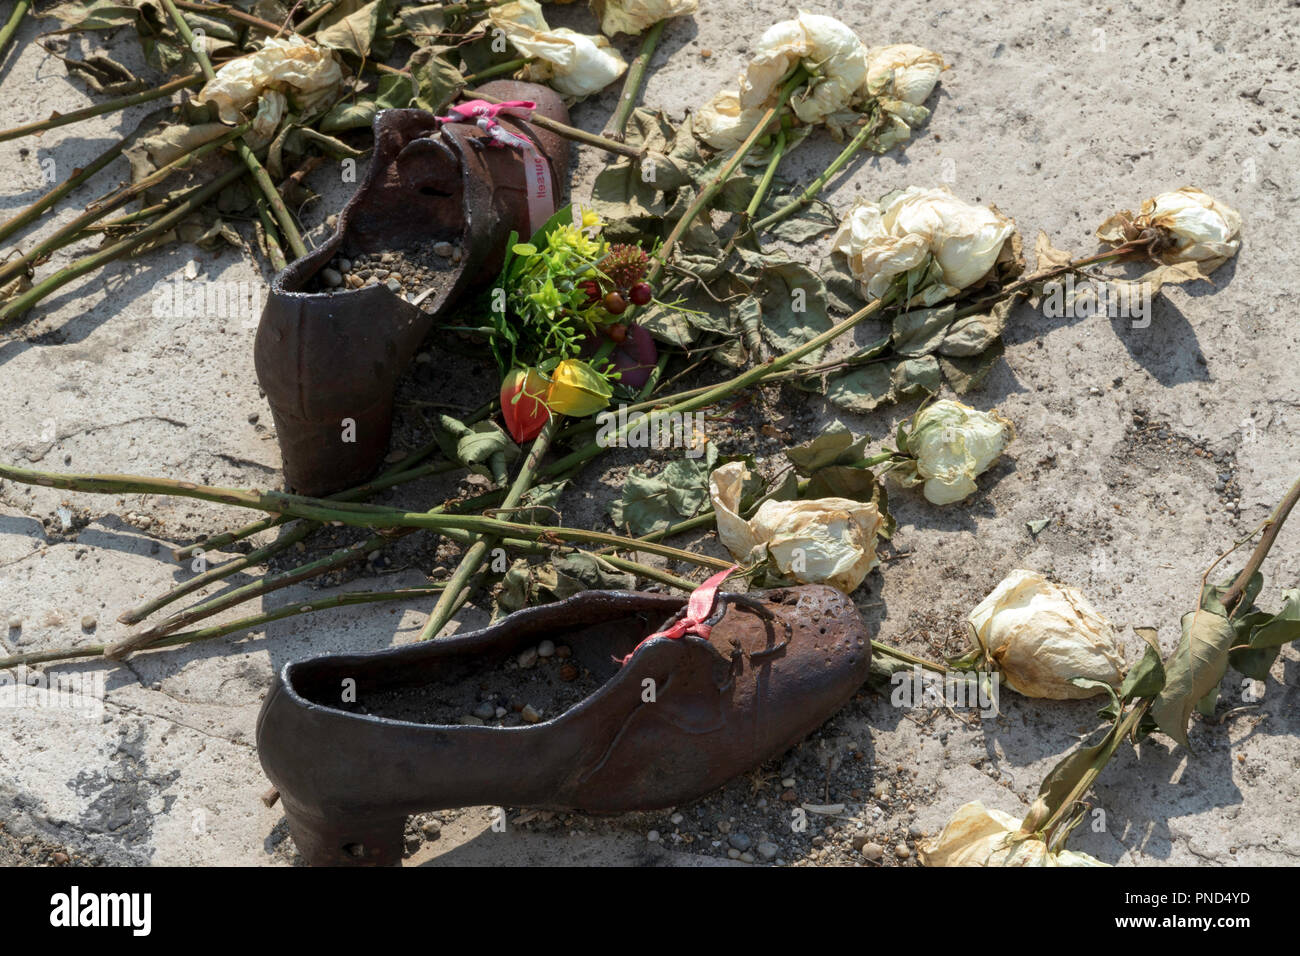 Shoes on the Danube, a memorial to Holocaust victims of WWII Stock Photo